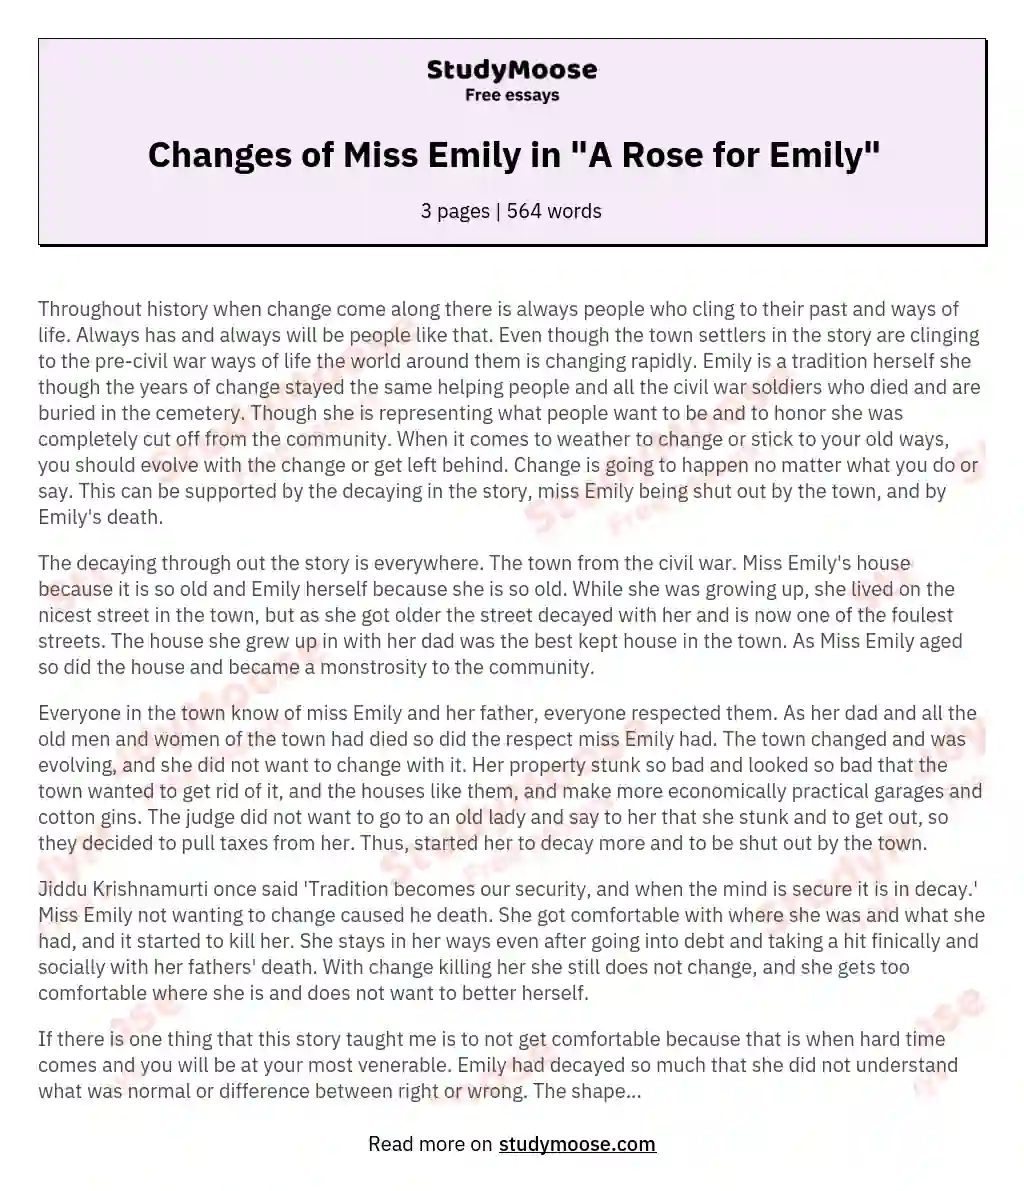 Changes of Miss Emily in "A Rose for Emily"